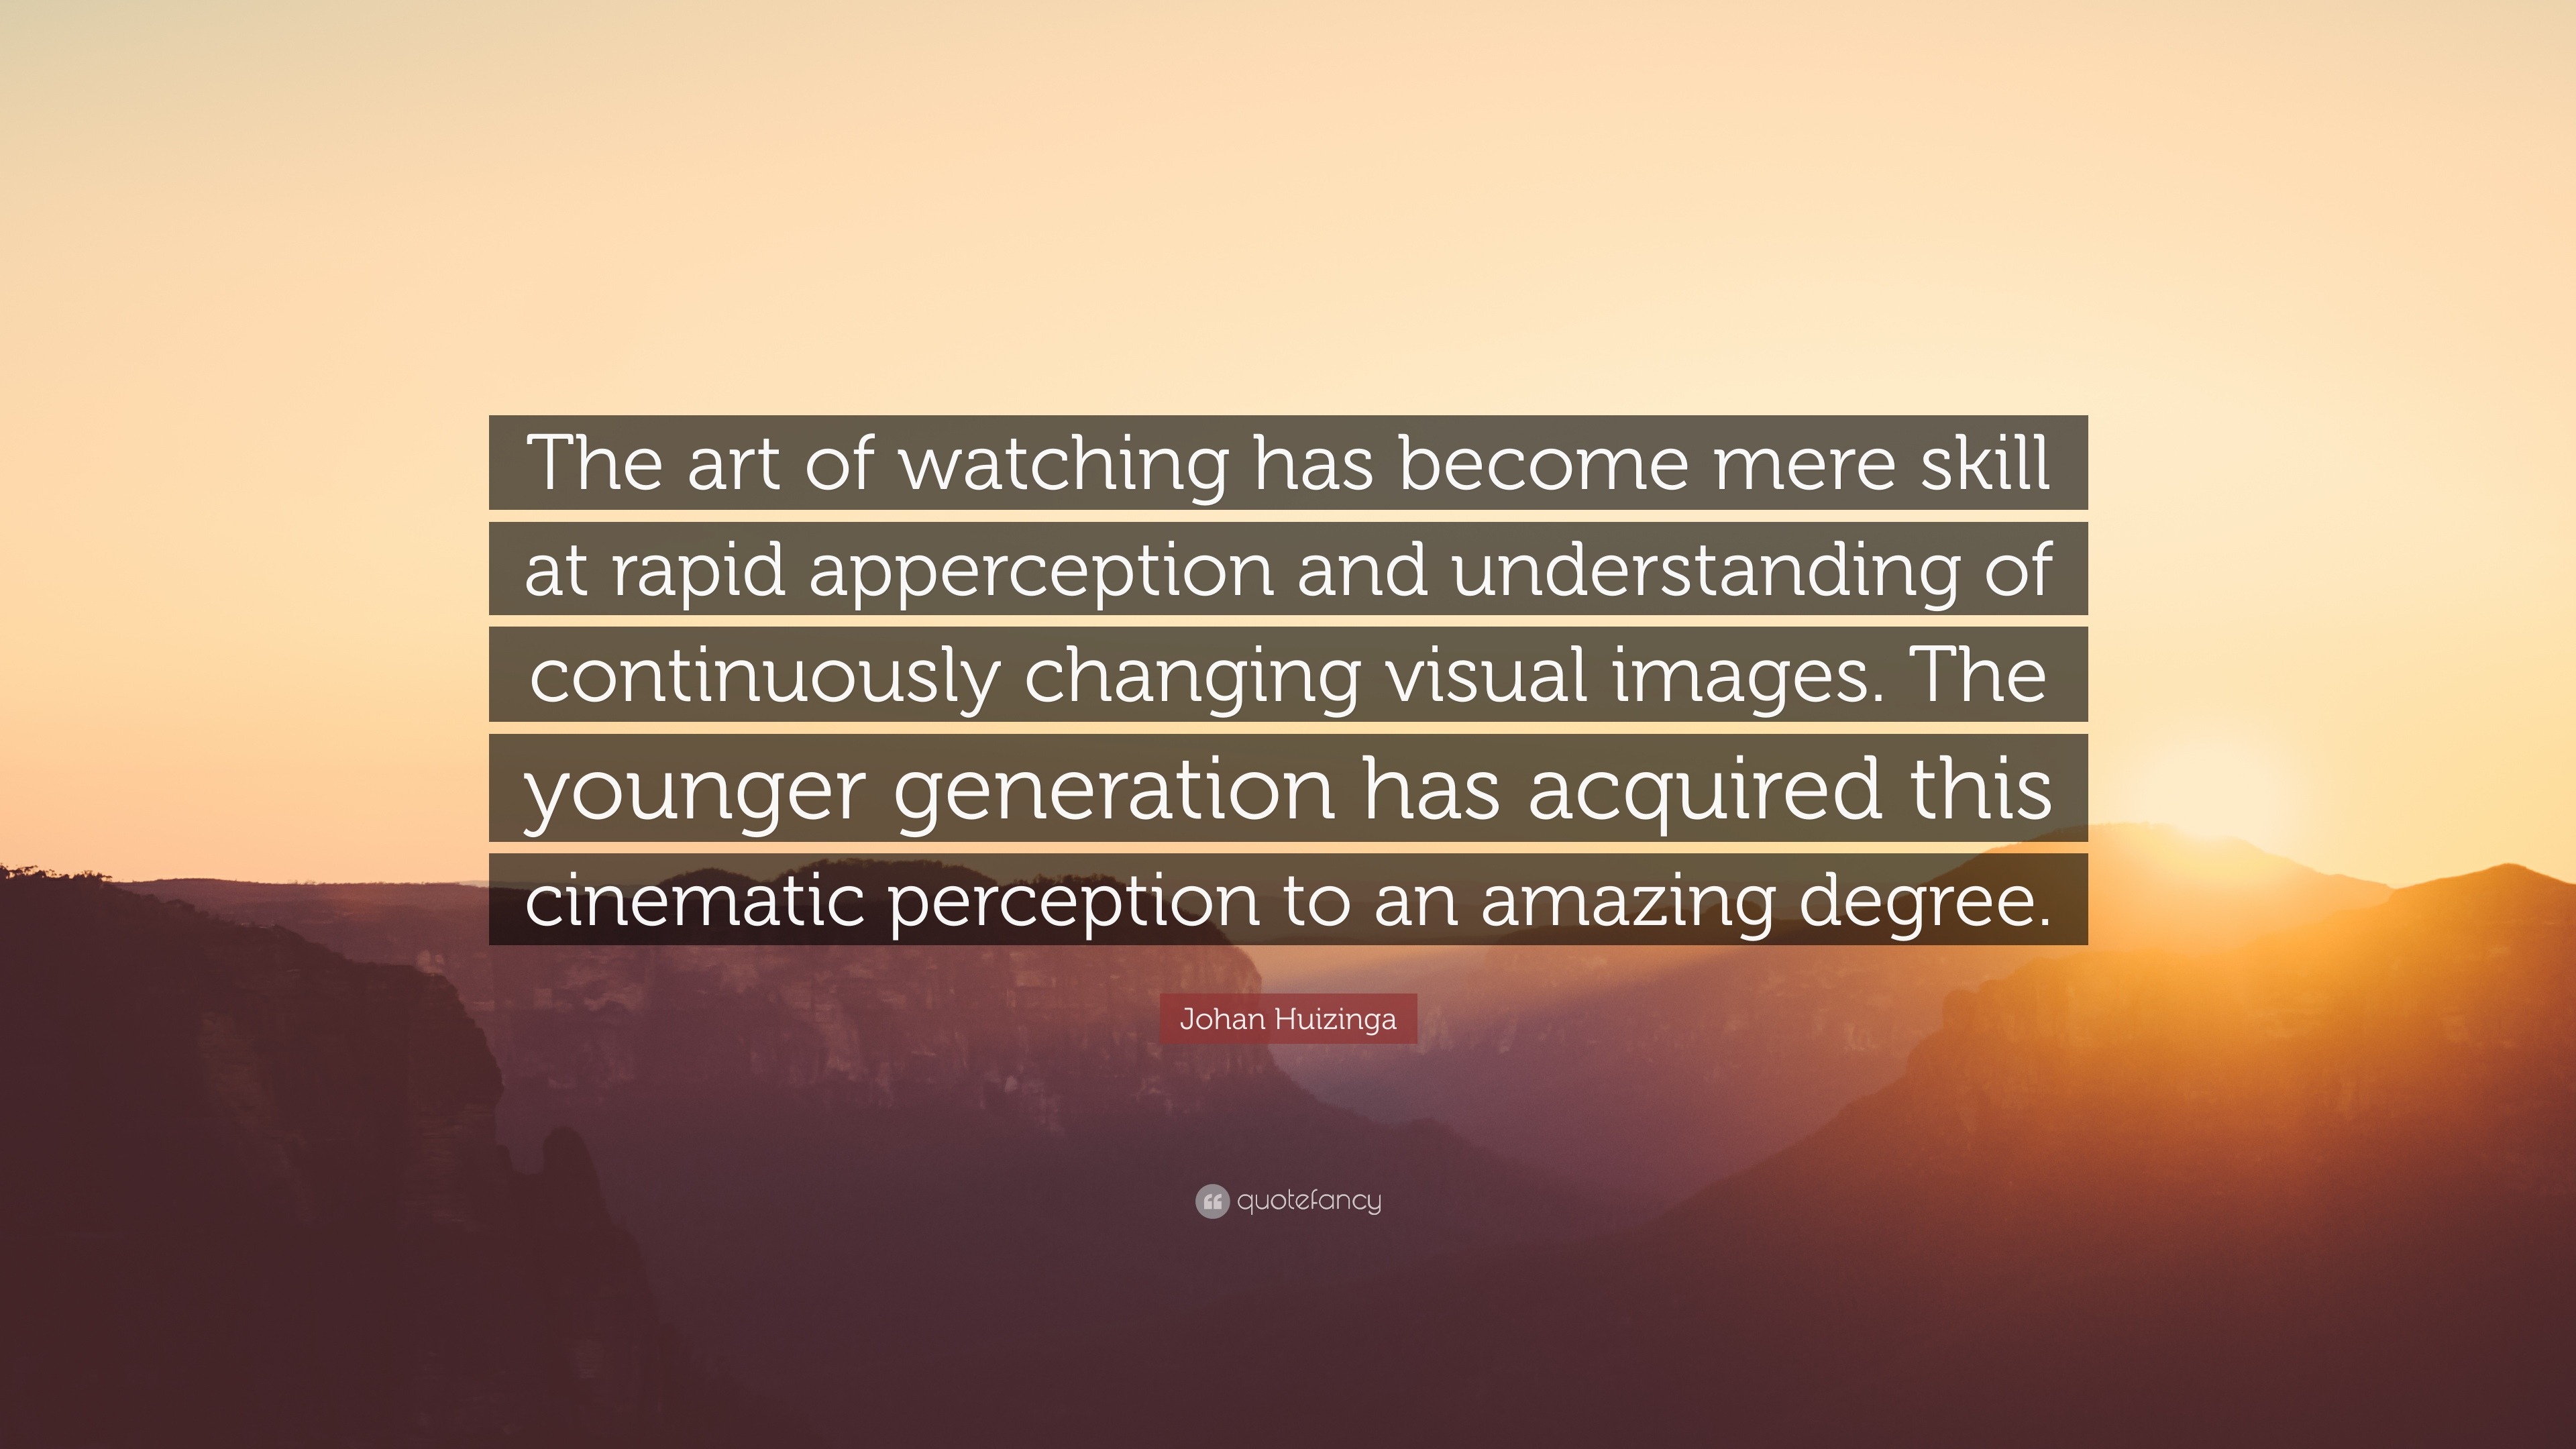 961200 Johan Huizinga Quote The art of watching has become mere skill at